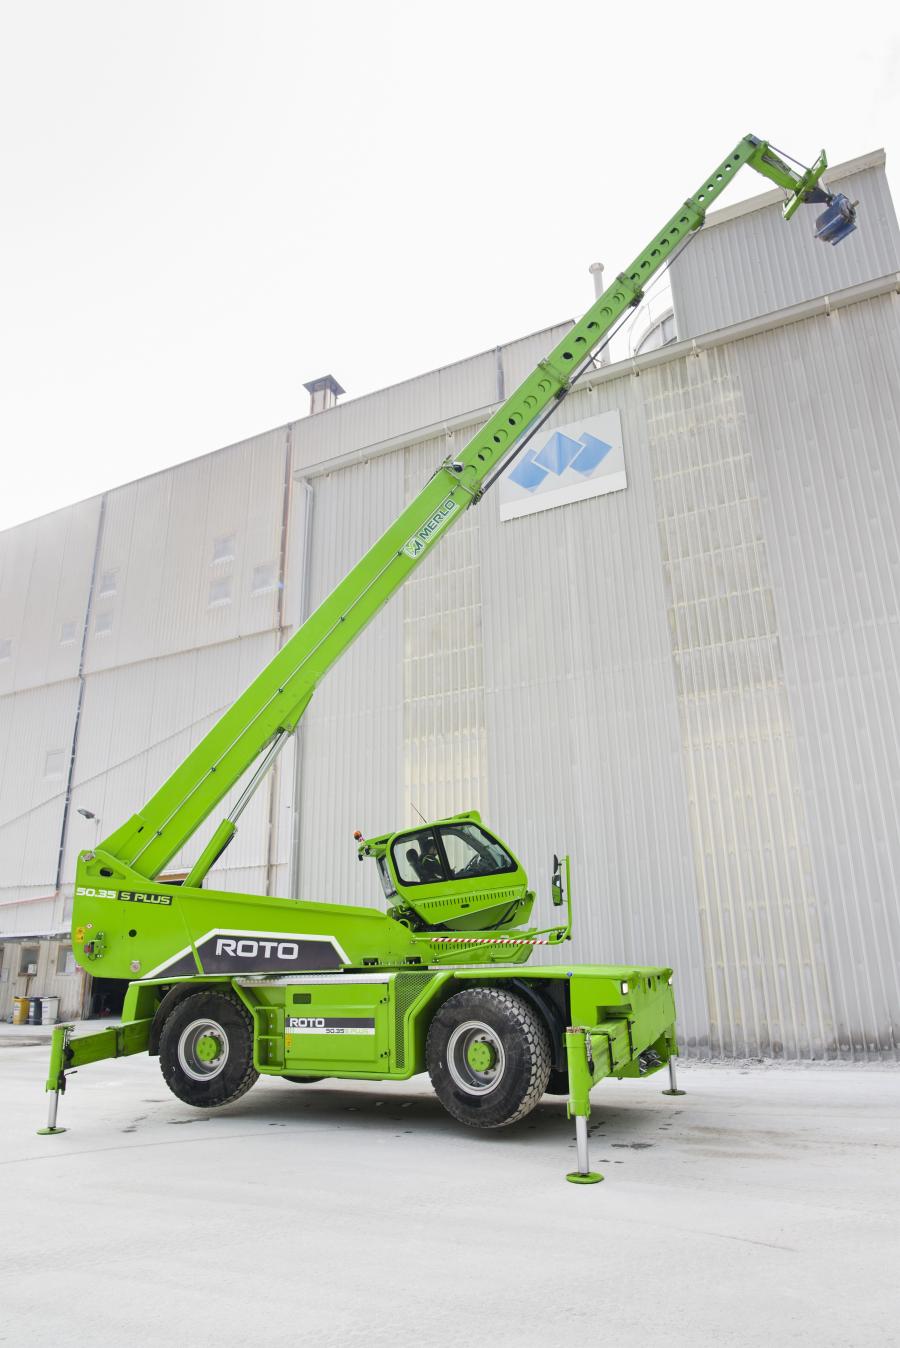 Roto50.35 S-Plus brings a newly engineered tilt cab with integrated controls, 89 ft. (27 m) reach, maximum capacity of 10,900lbs. (4,944 kg), 360-degree rotating turret, tilt cab, and a new safety system. It is offered exclusively to the U.S. market through Applied Machinery Sales and its dealers.